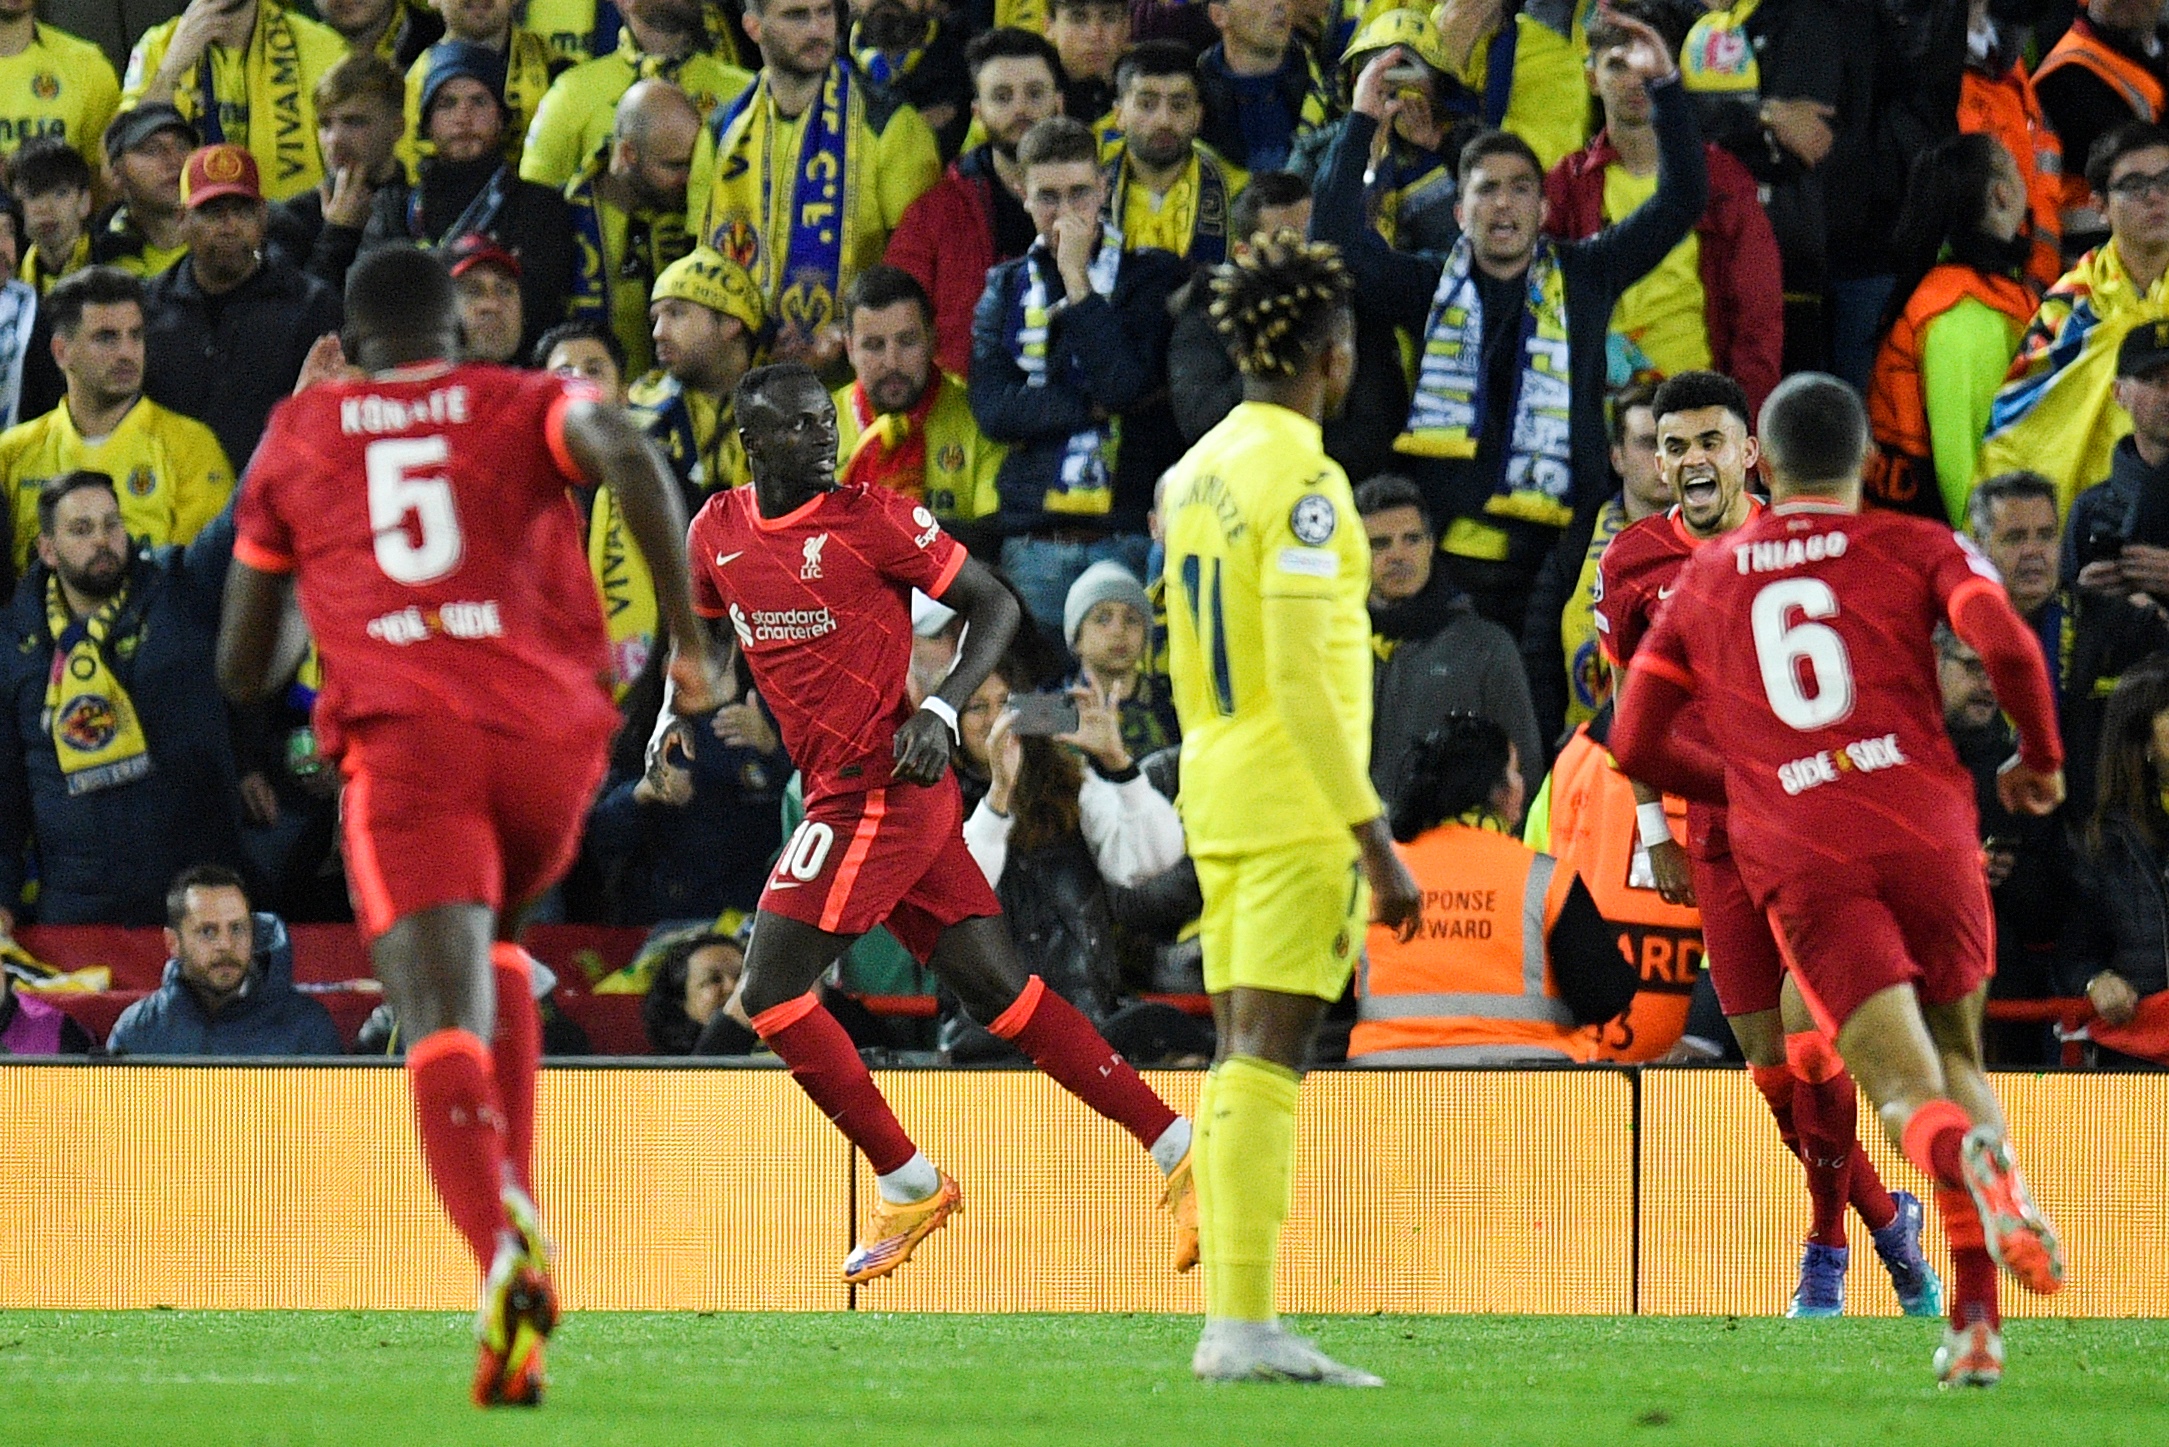 Liverpool's Senegalese striker Sadio Mane celebrates after scoring his team second goal during the UEFA Champions League semi-final first leg football match between Liverpool and Villarreal, at the Anfield Stadium, in Liverpool, on April 27, 2022. (Photo by Oli SCARFF / AFP) (Photo by OLI SCARFF/AFP via Getty Images)